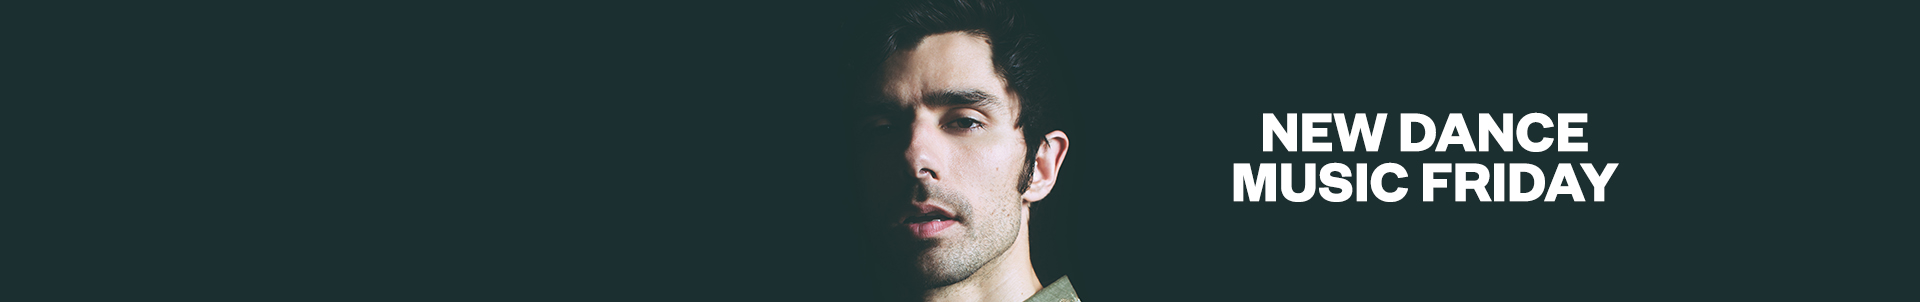 Exclusive interview: New Dance Music Friday with KSHMR